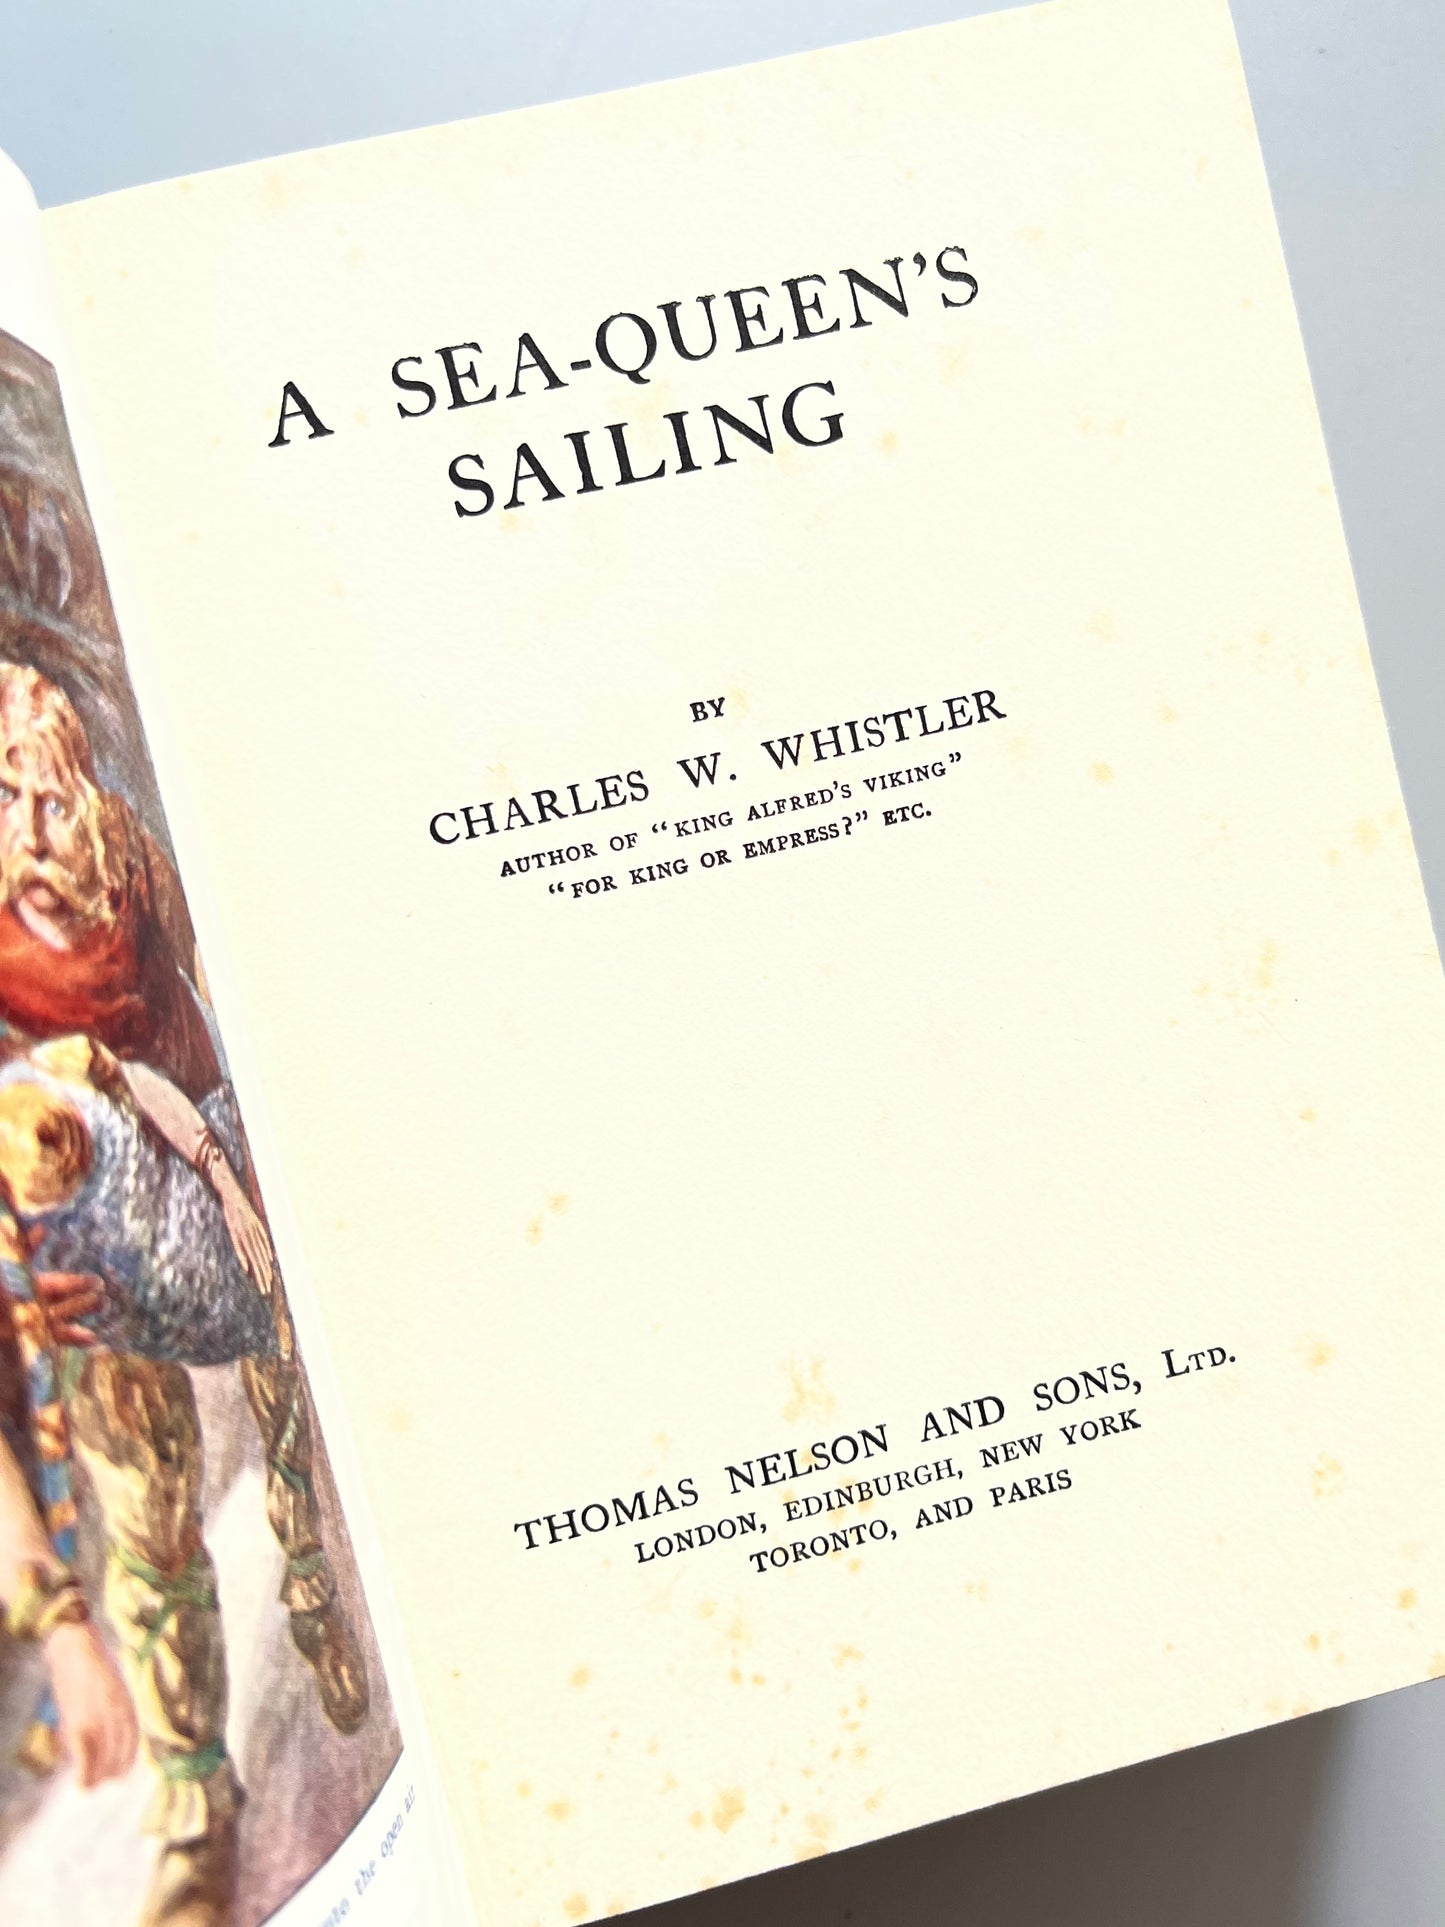 A sea-queen's sailing, Charles W. Whistler - Thomas Nelson and Sons, ca. 1920